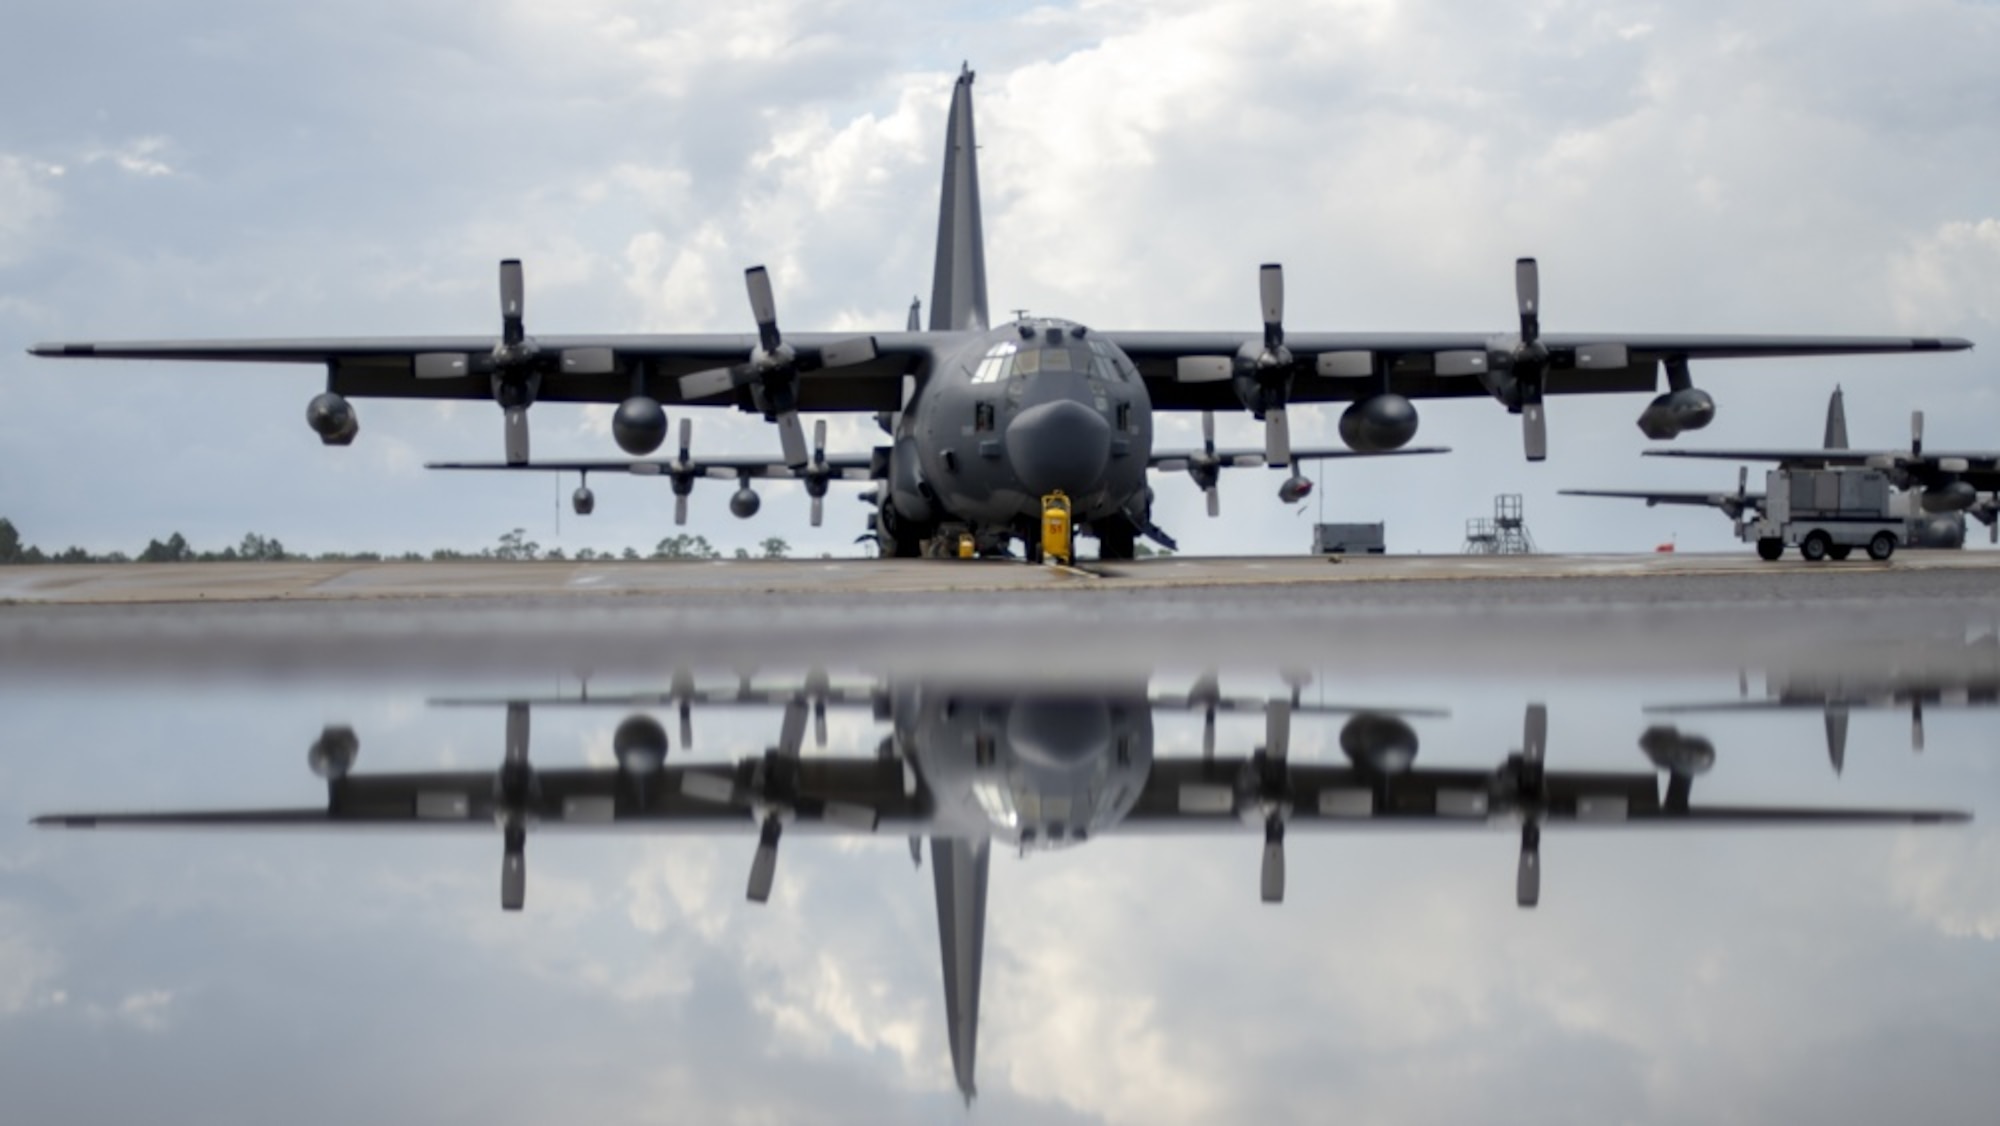 An MC-130H Combat Talon II assigned to the 15th Special Operations Squadron sits on the flightline after a morning rainstorm at Hurlburt Field, Fla., Aug. 21, 2018. The MC-130H is used for infiltration, exfiltration and resupply in contested or denied areas, and is capable of flying at altitudes as low as a few hundred feet above the ground through inclement and low-visibility weather conditions. (U.S. Air Force photo by Staff Sgt. Victor J. Caputo)